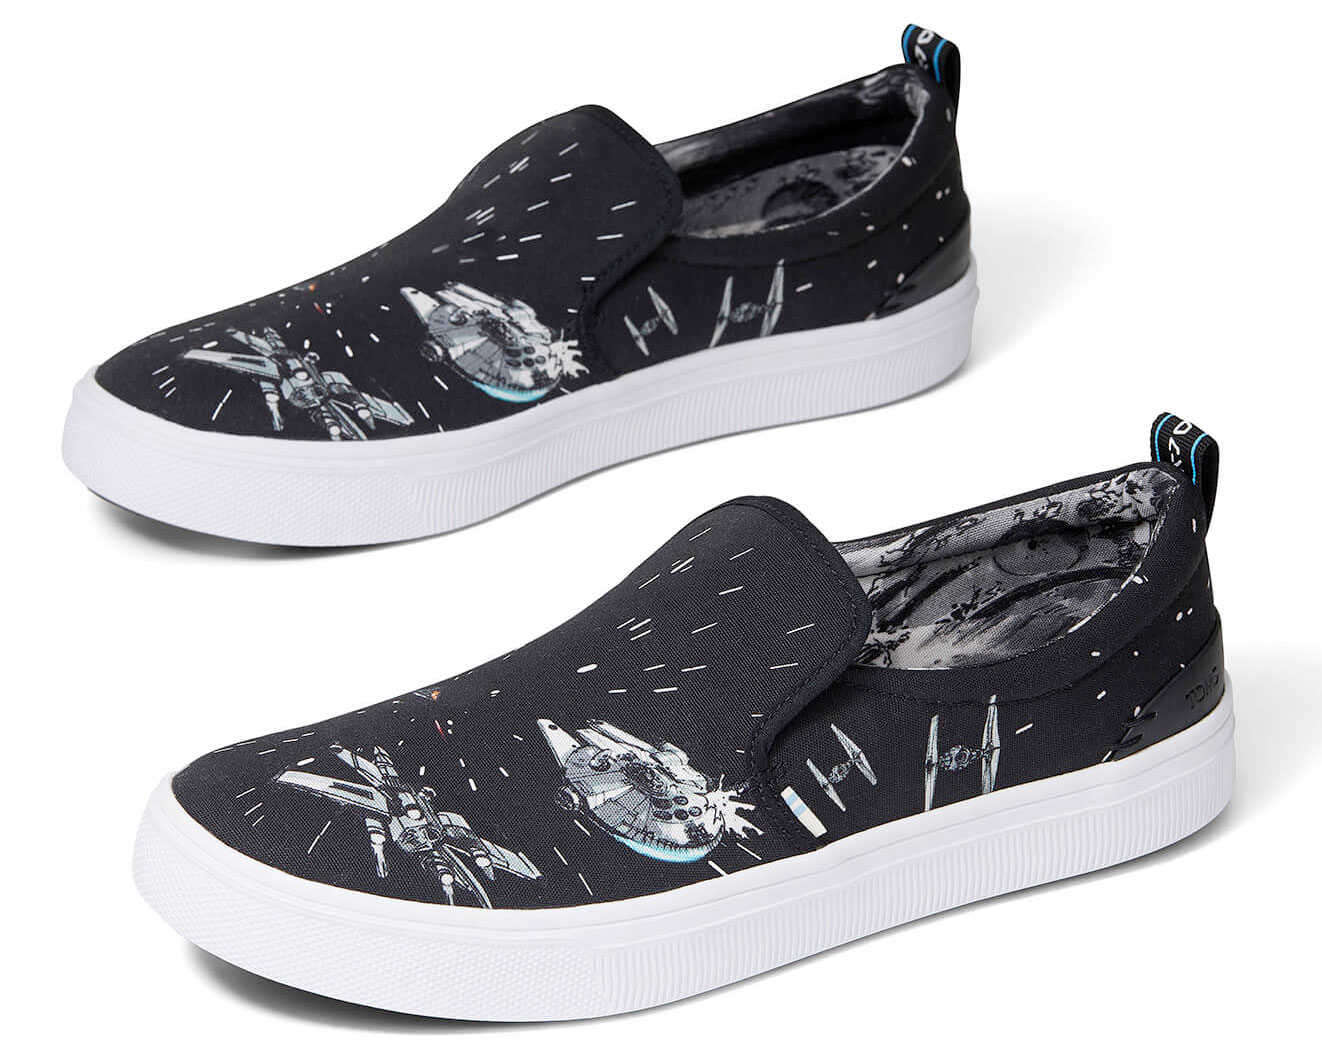 Cool Stuff: TOMS 'Star Wars' Shoes Sweep You Off To A Galaxy Far, Far Away